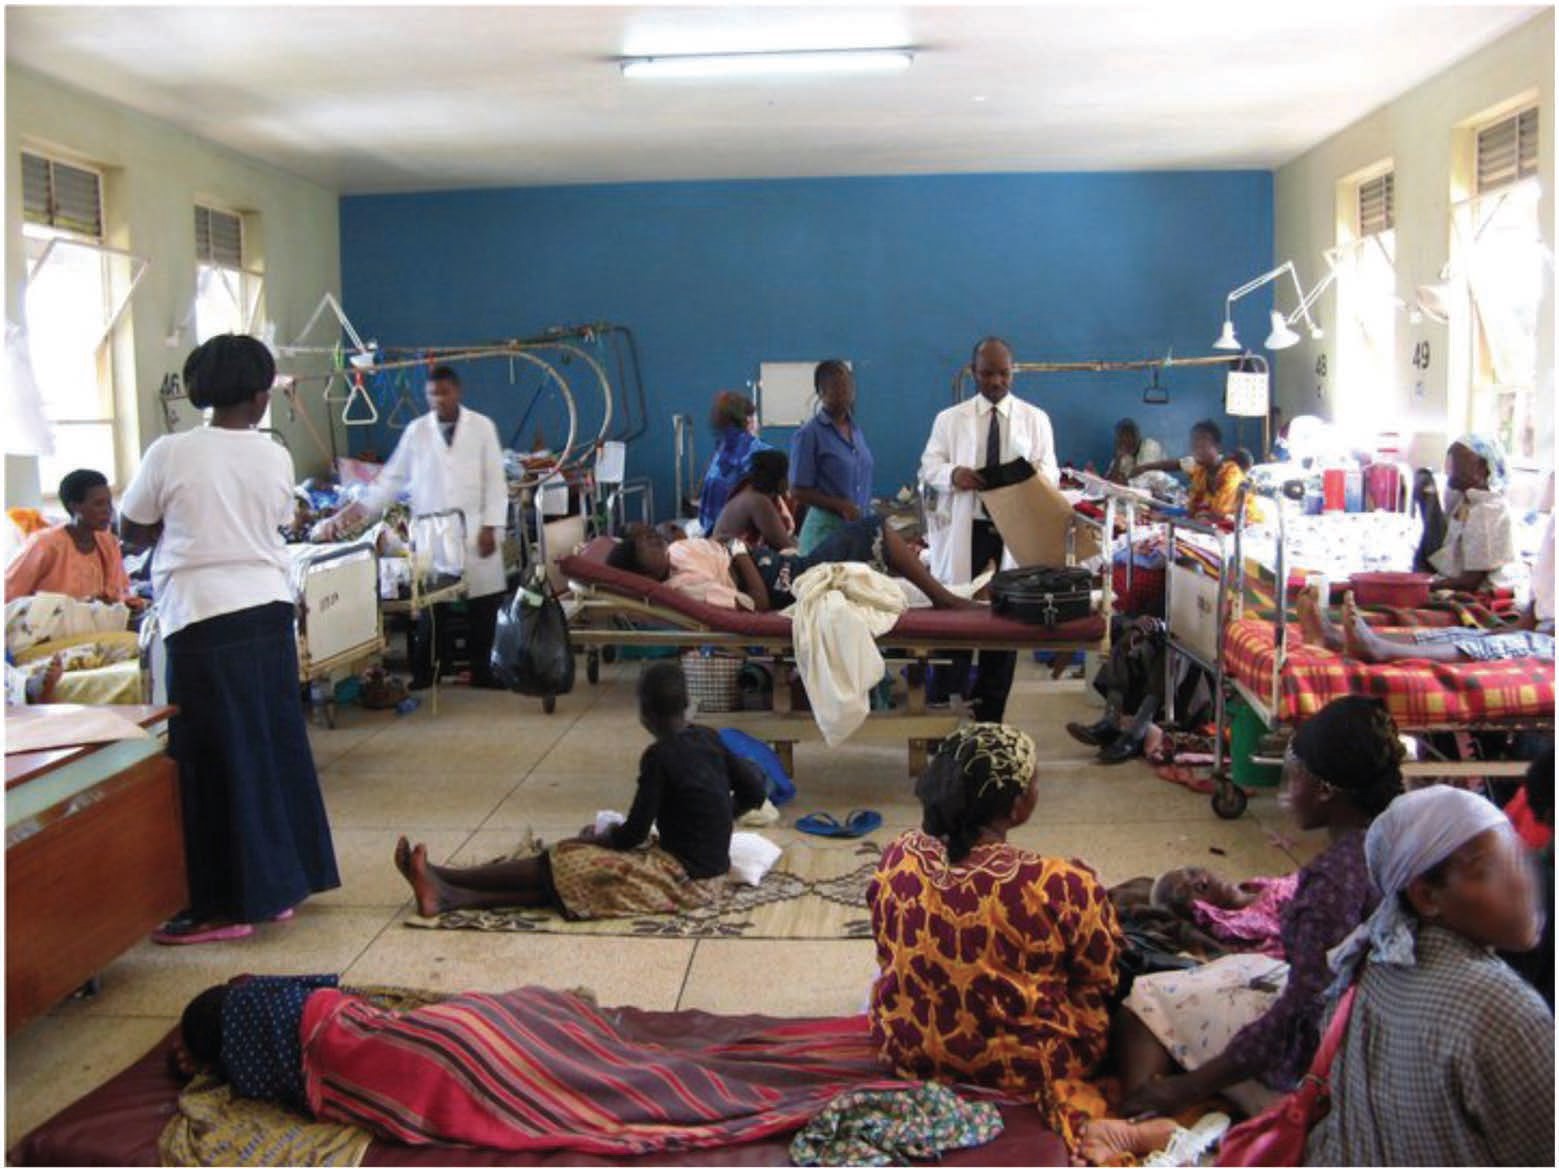 Towards entry "Department of Medicine 4 wins grant for supporting patient-centered care in Uganda"